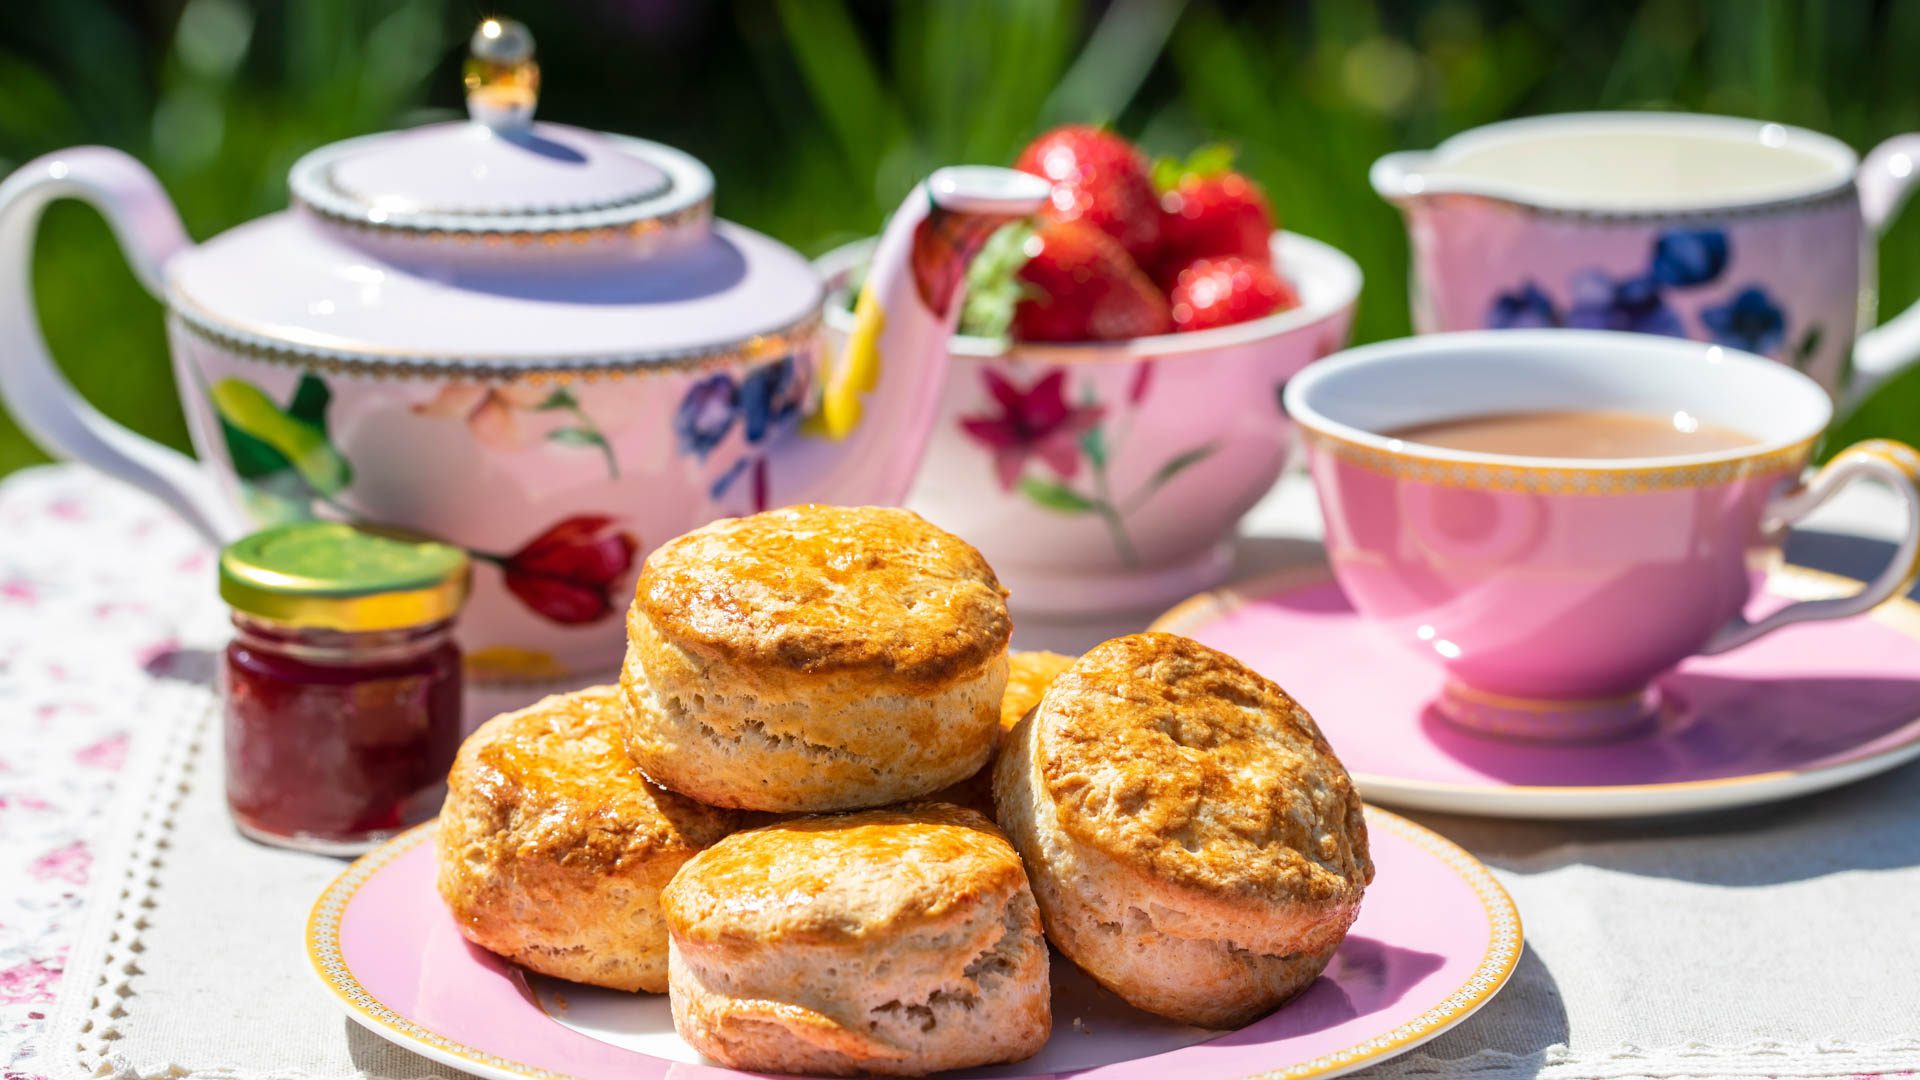 A traditional afternoon tea in Britain with a pot of tea and scones